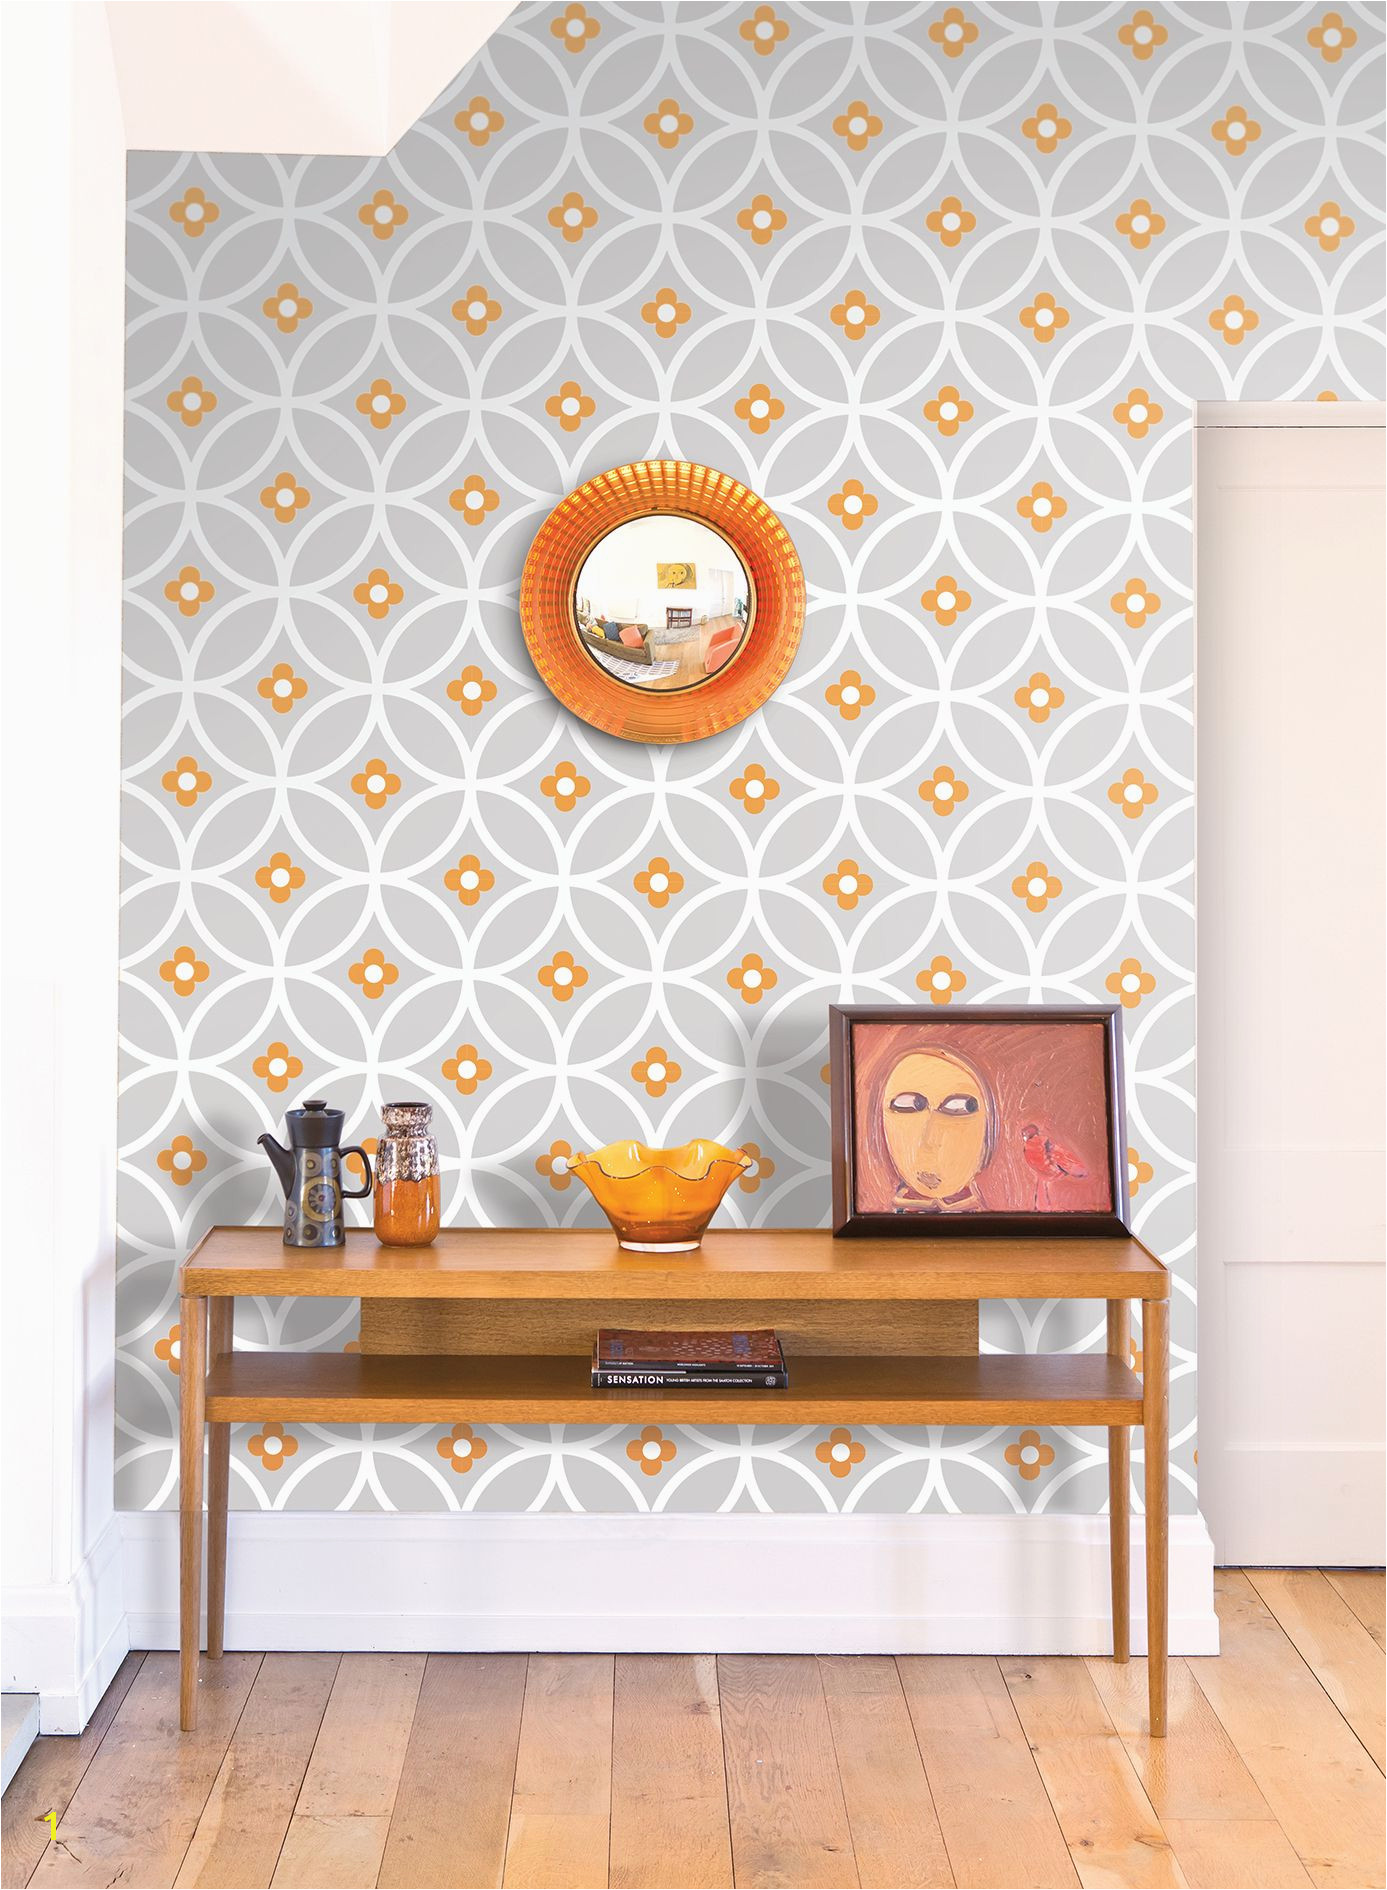 Mid Century Modern Wallpaper Ideas for Your Home this Winter blog